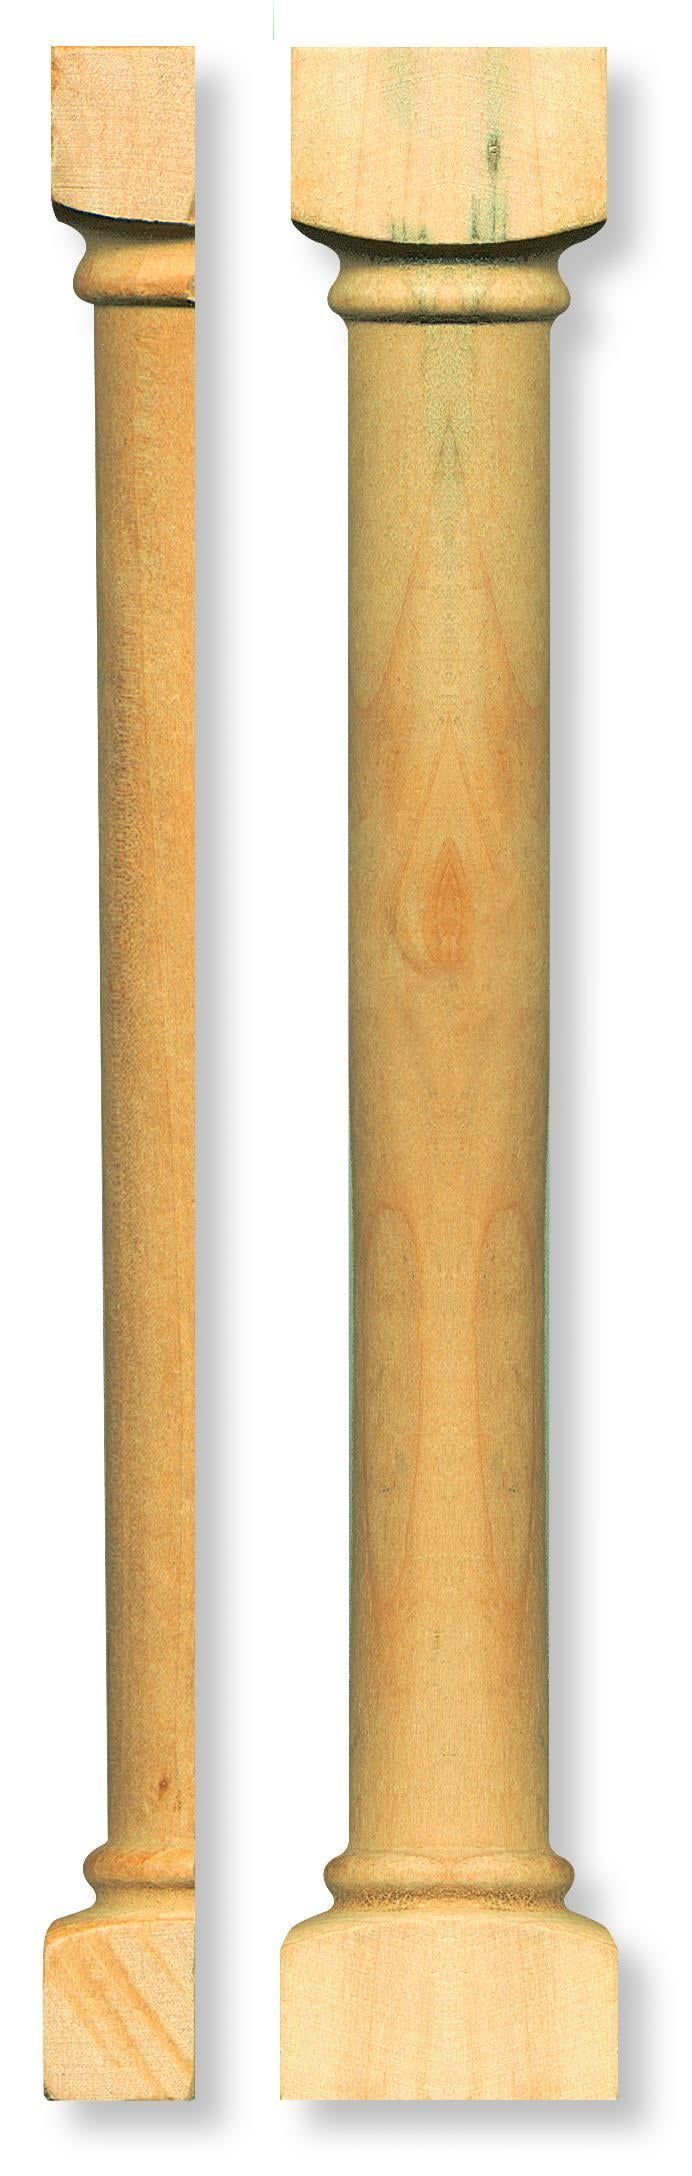 Wooden Pillars 175mm Full and Half  for 12th Scale Dolls House